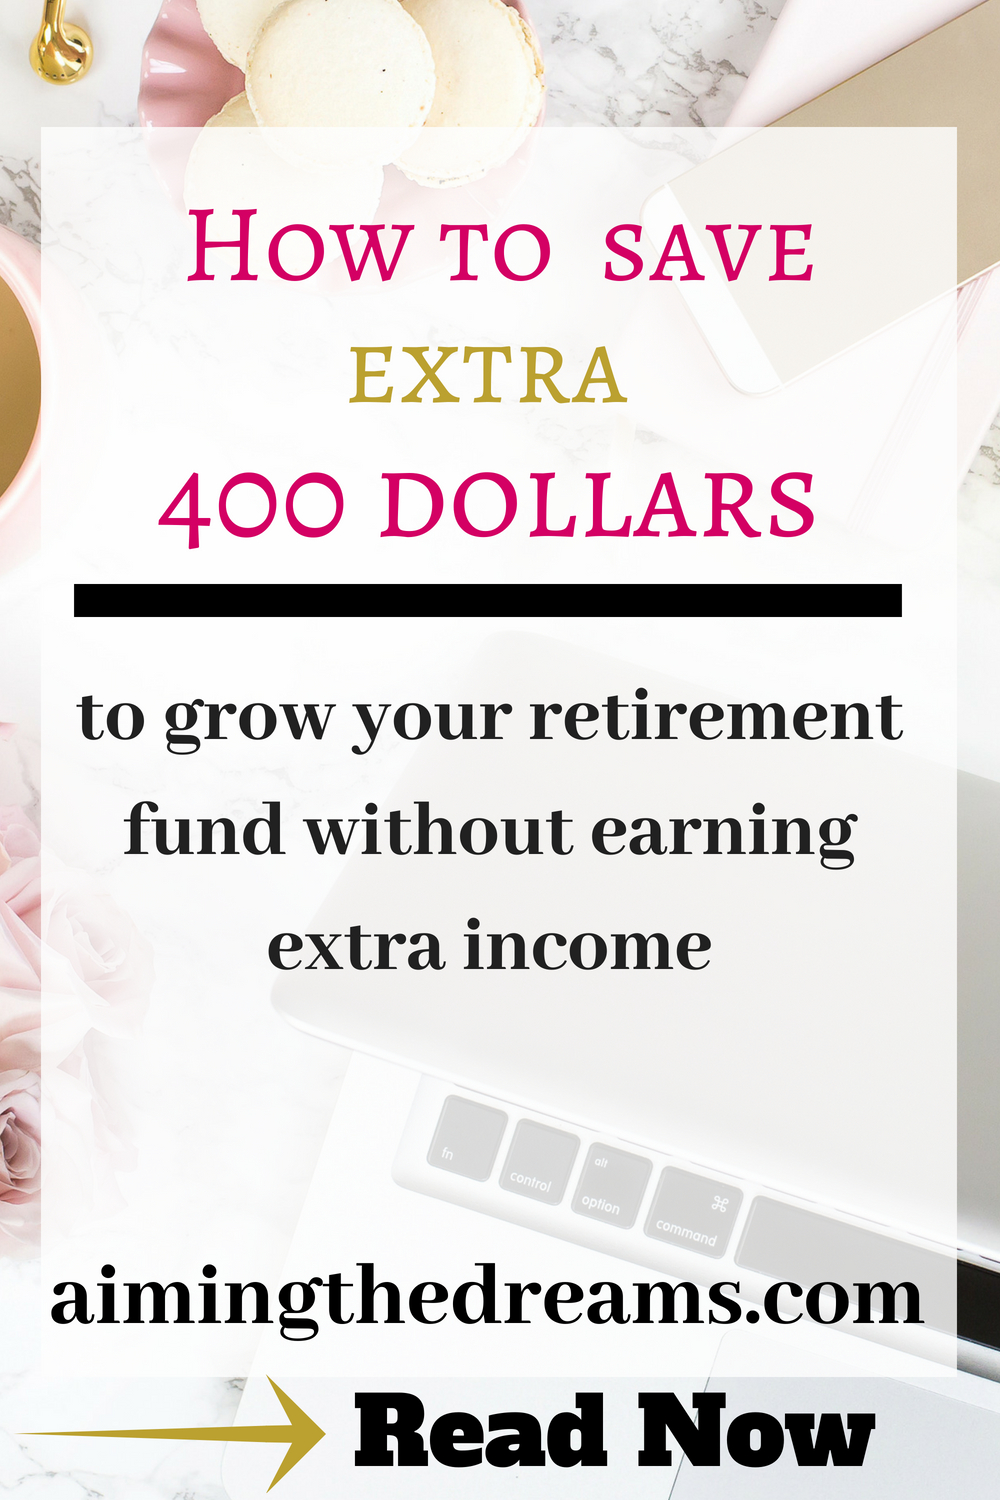 Save extra 400 dollars for your retirement from yuor already tight budget and doing some extra side hustles.